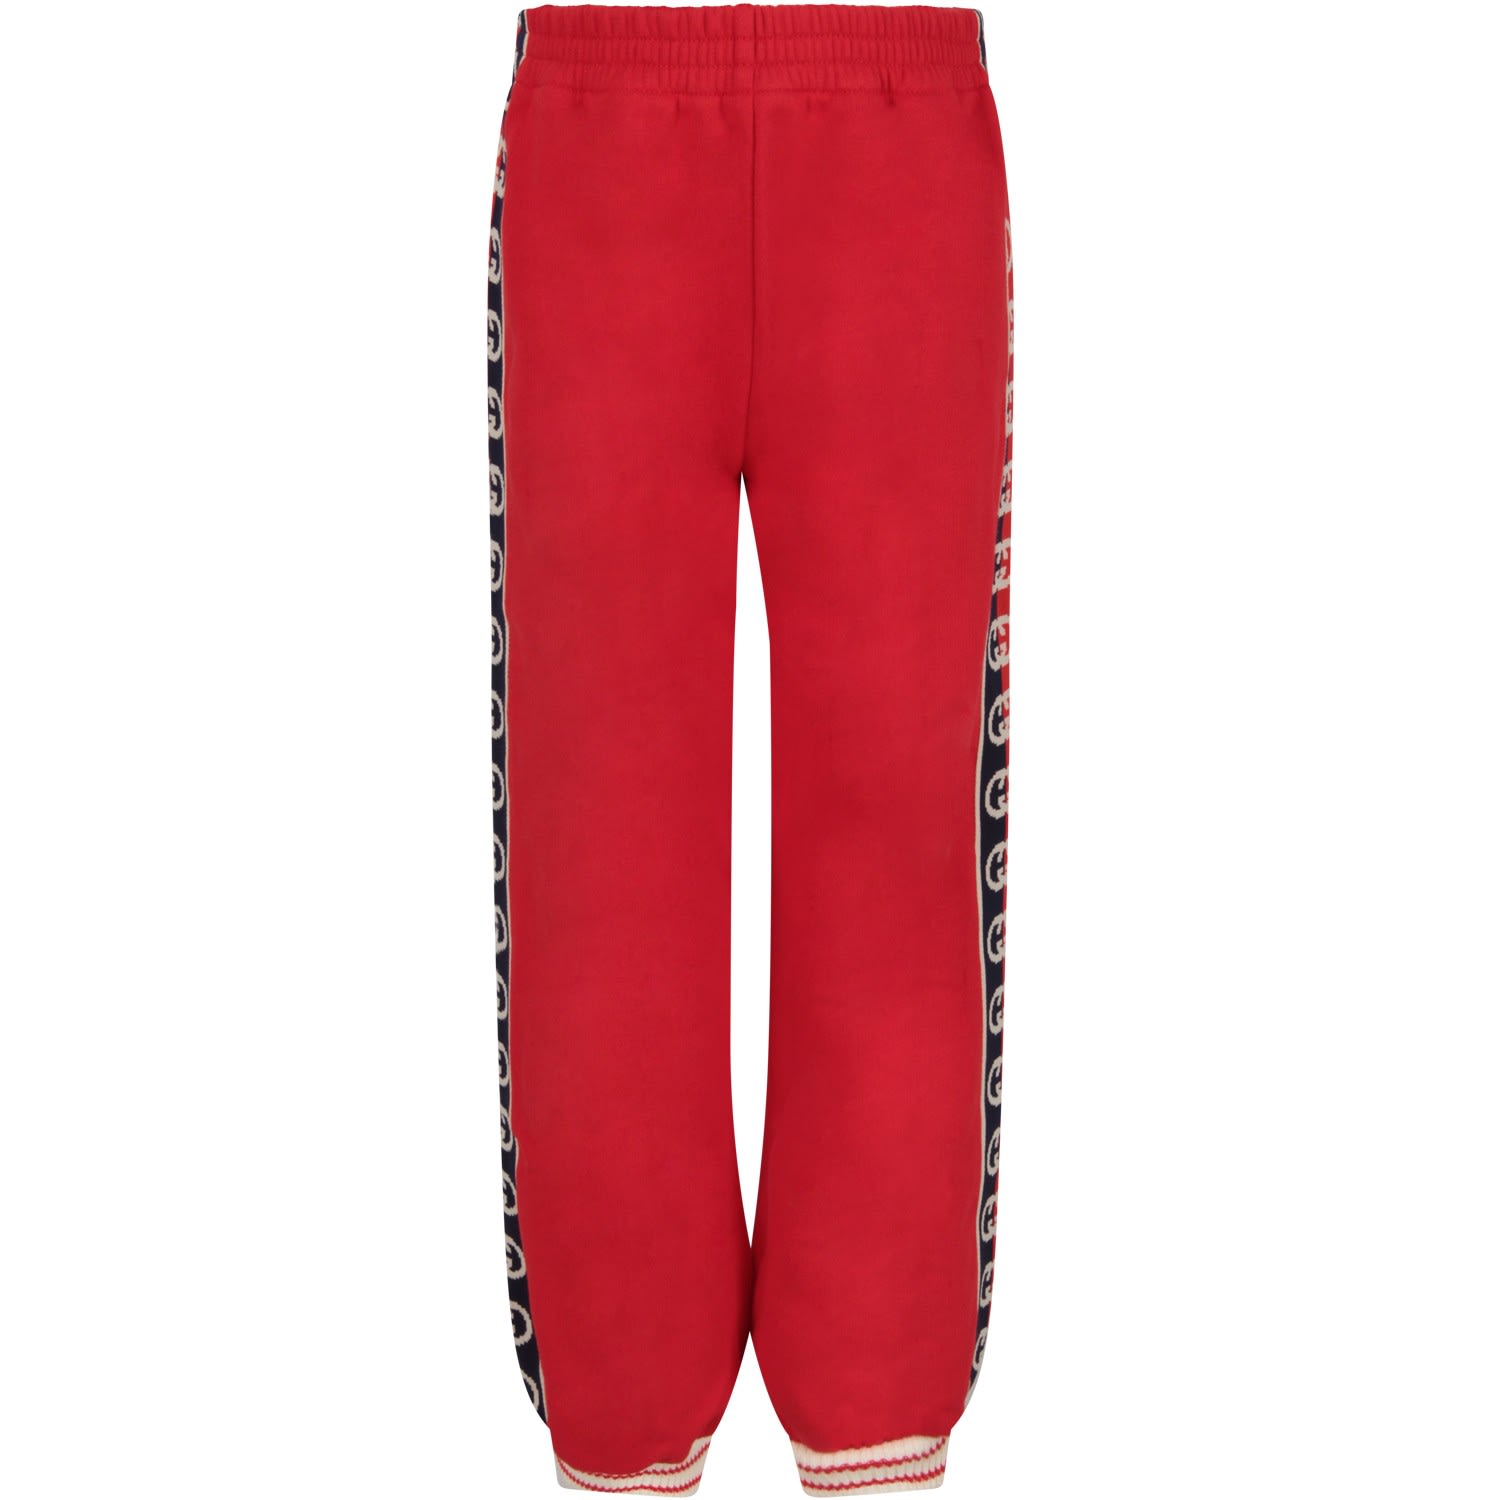 GUCCI RED SWEATPANTS FOR KID WITH DOUBLE GG,11259422